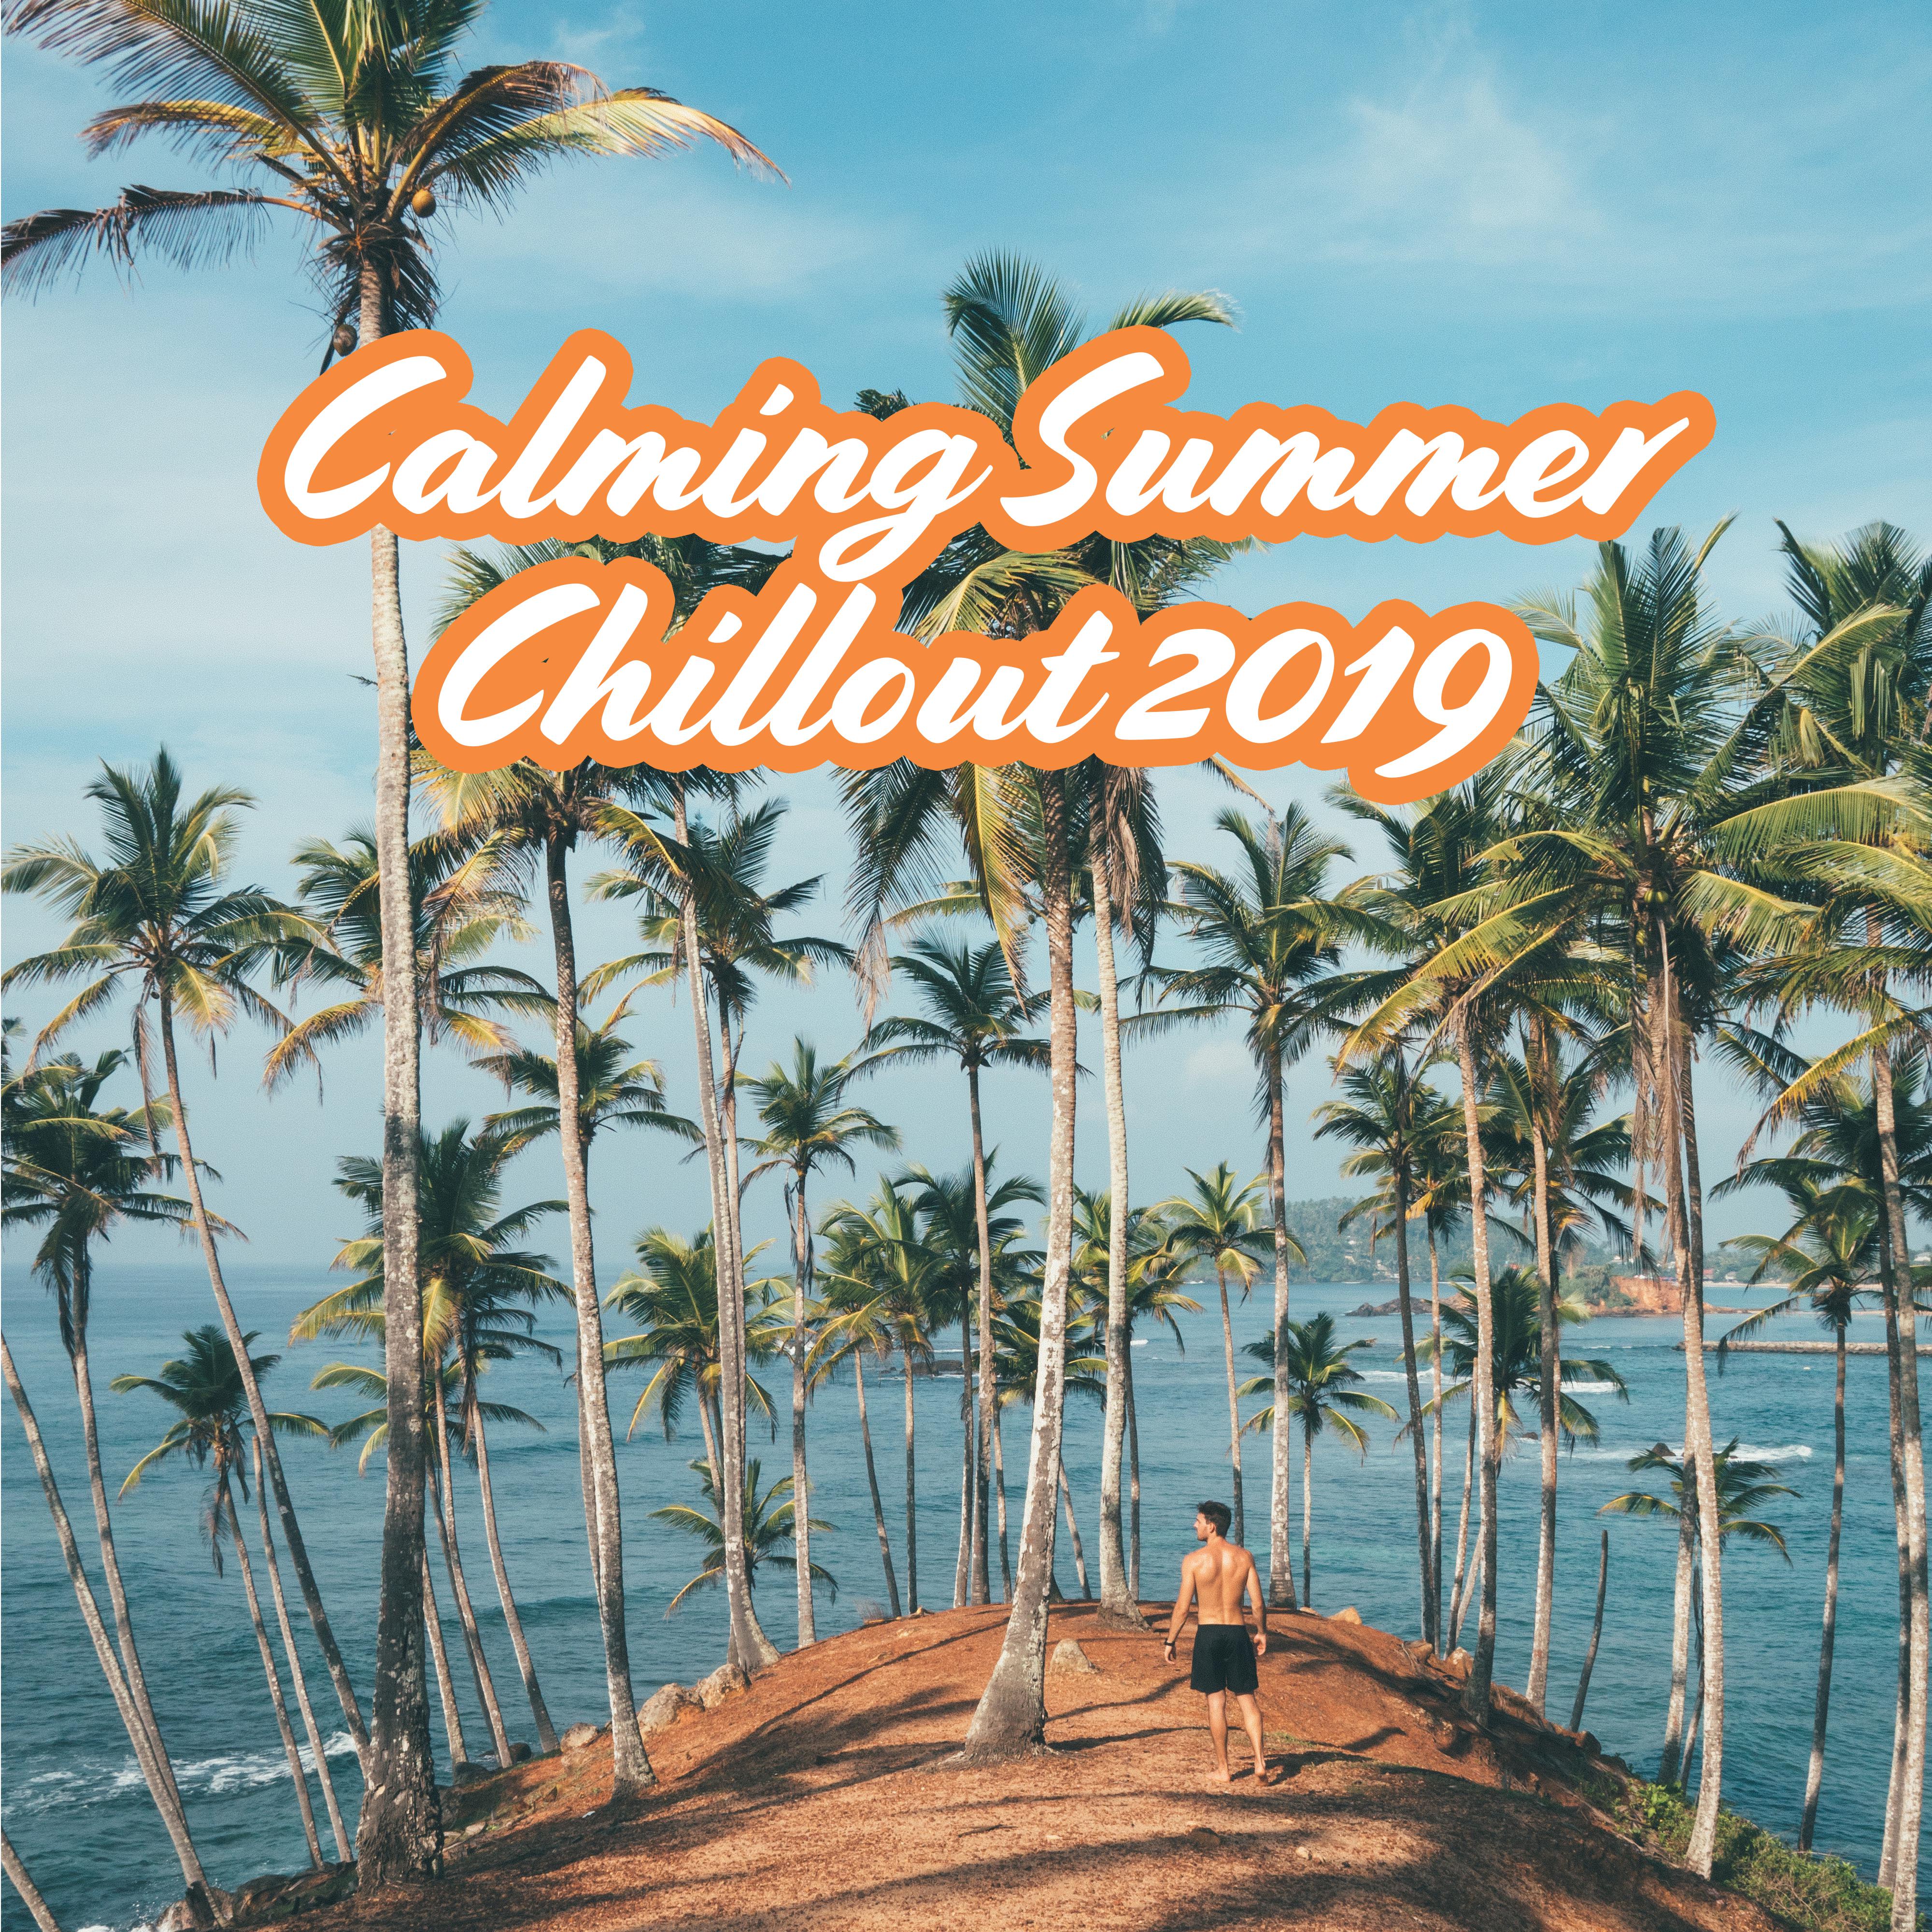 Calming Summer Chillout 2019  Ibiza Chill Out, Perfect Relax Zone, Beach Music, Zen Serenity, Sexy Vibes, Pure Mind